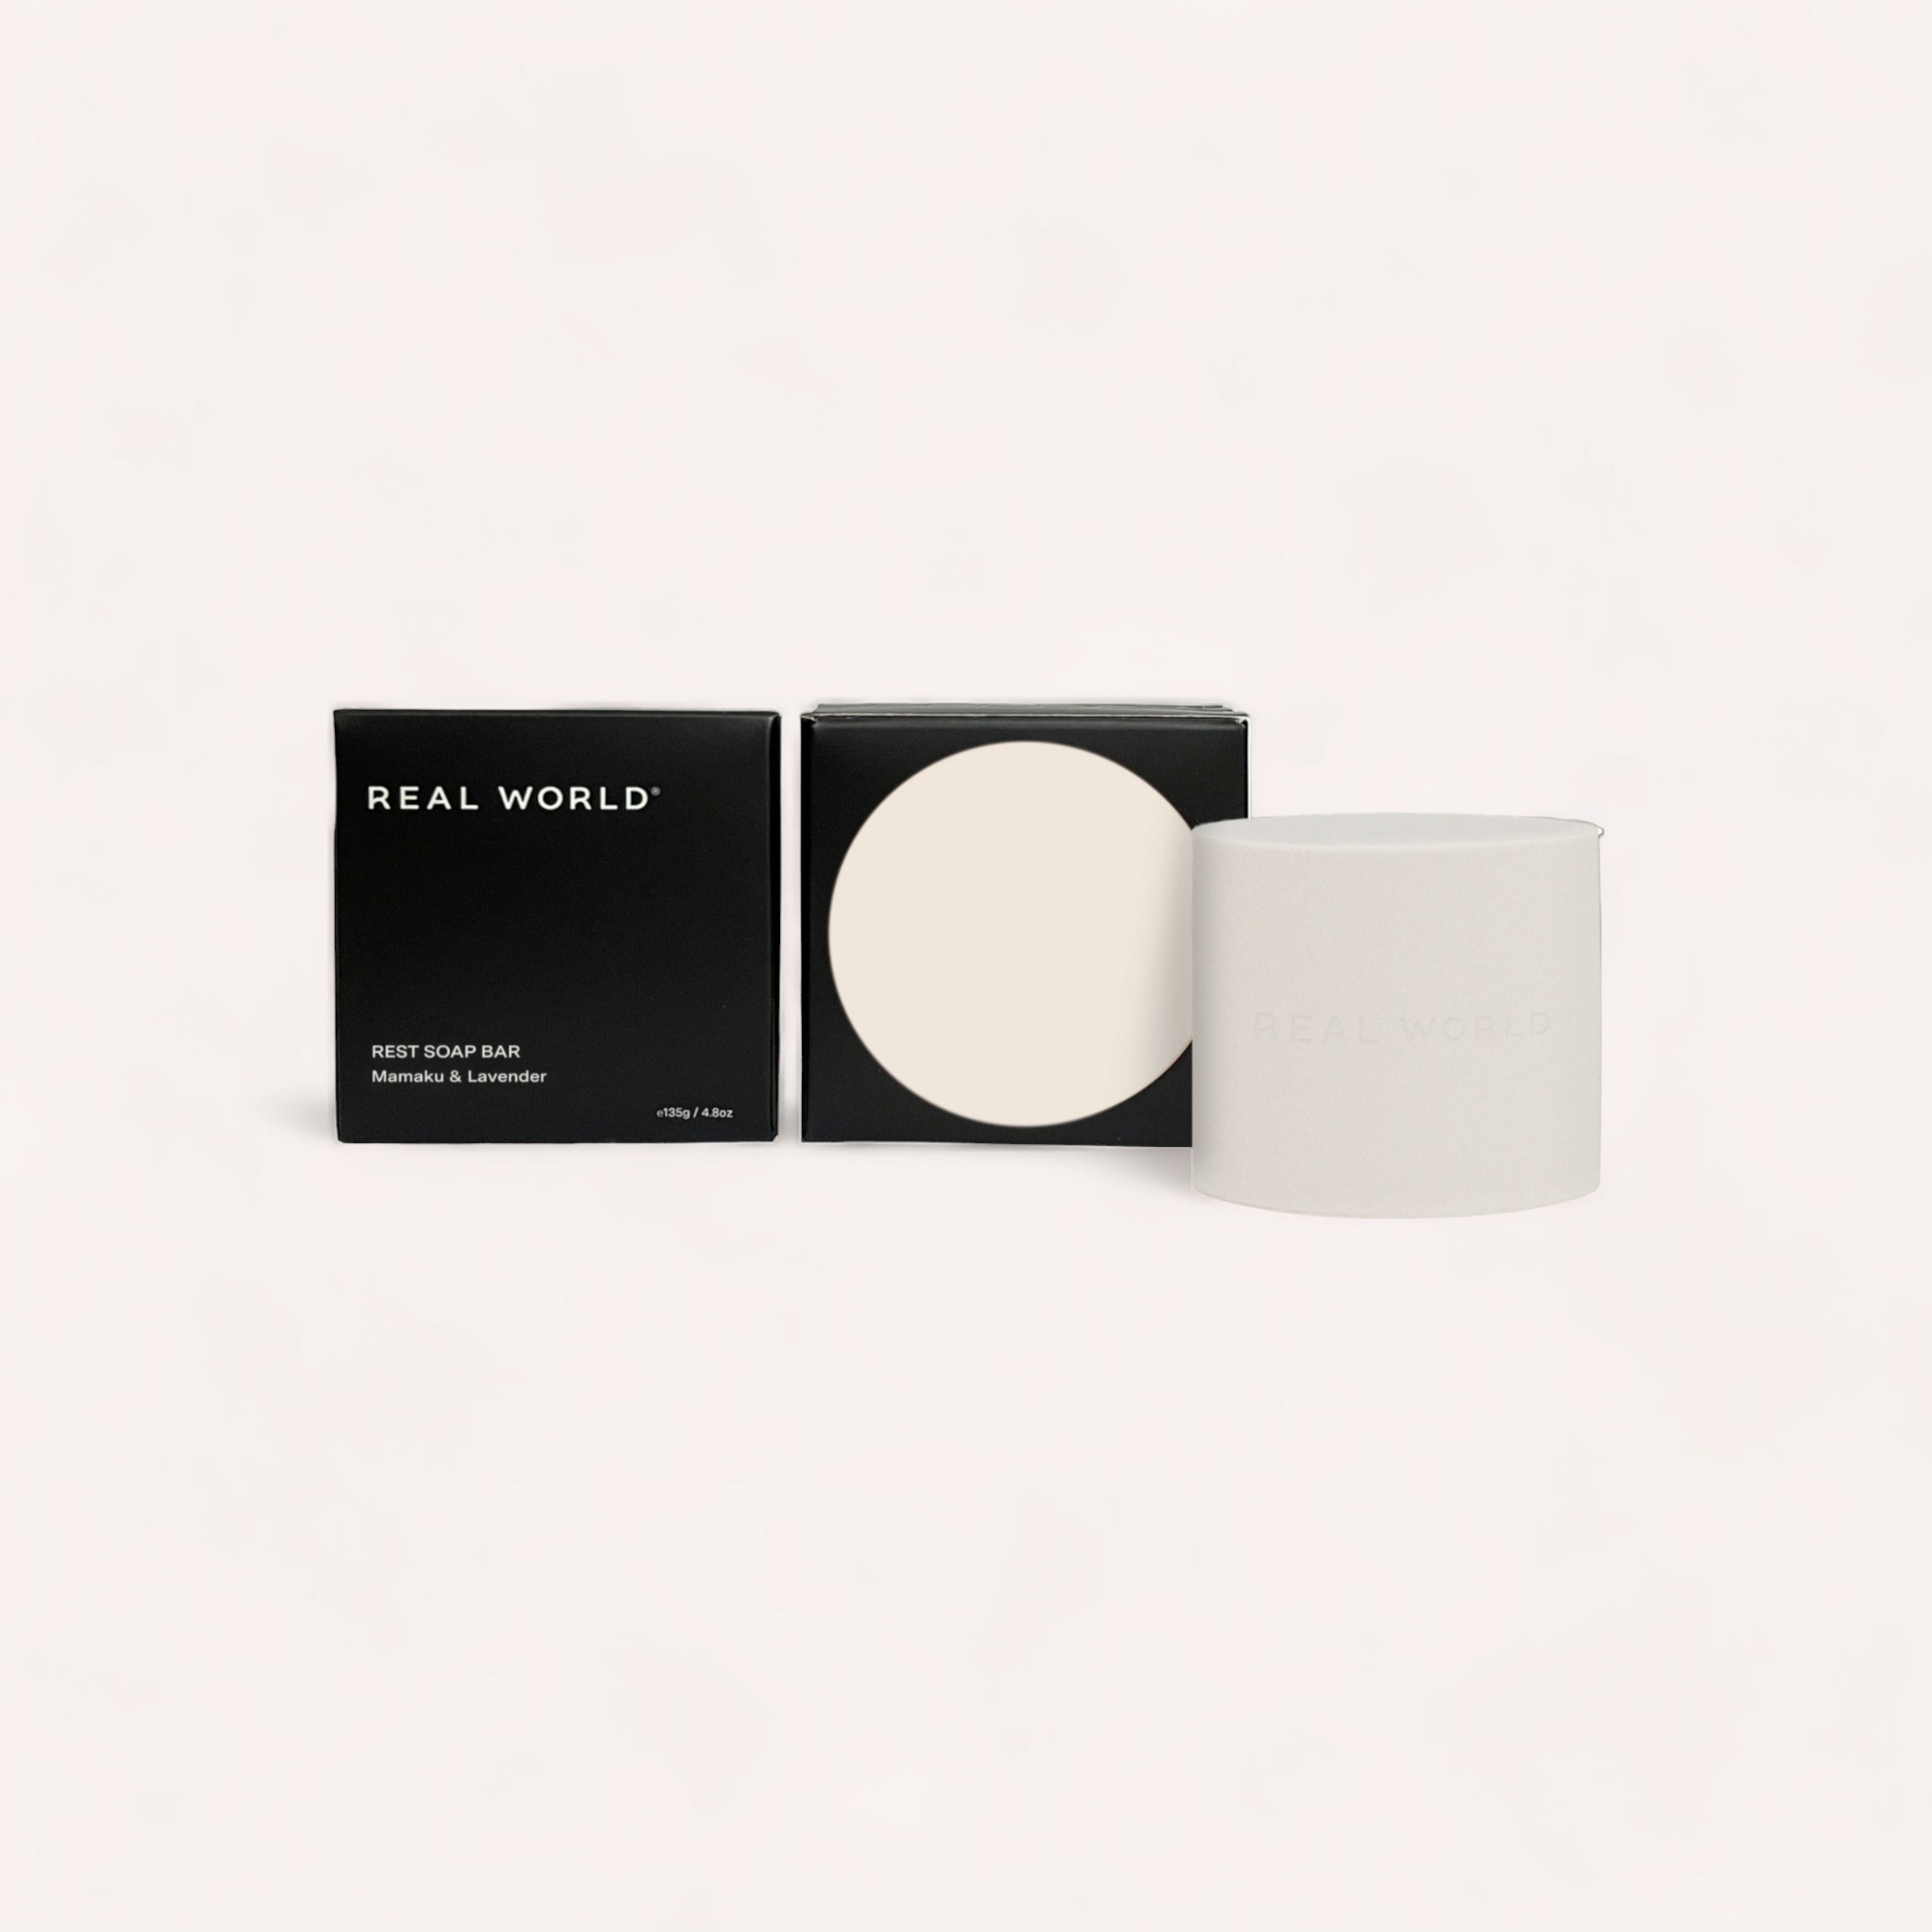 Sleek and modern packaging design for the "Soap Bar - Mamaku & Lavender" by Real World featuring a black and white color palette with clean typography, accented by notes of mamaku from New Zealand.